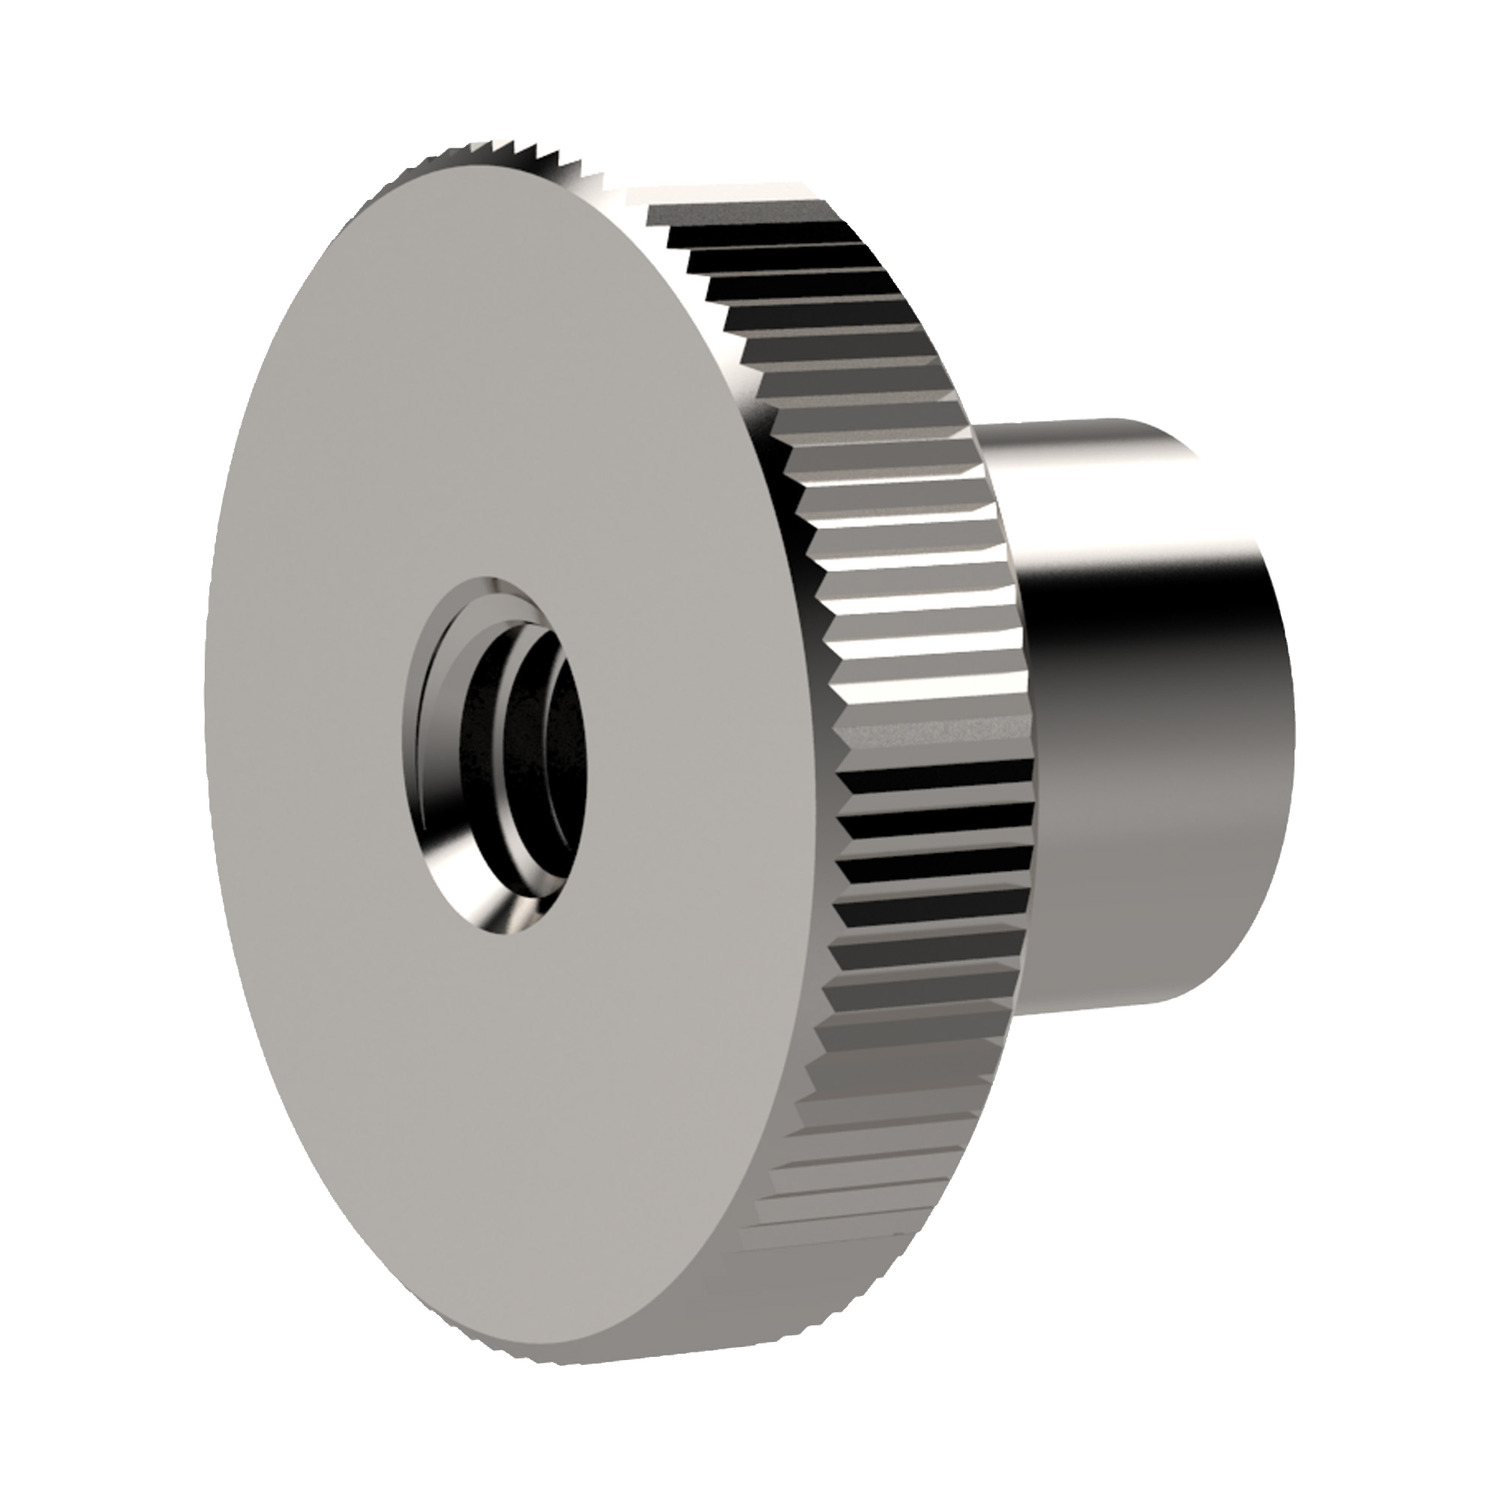 Knurled Nuts Knurled thumb nut with collar comes in stainless steel and with a matte, shot-blasted finish.